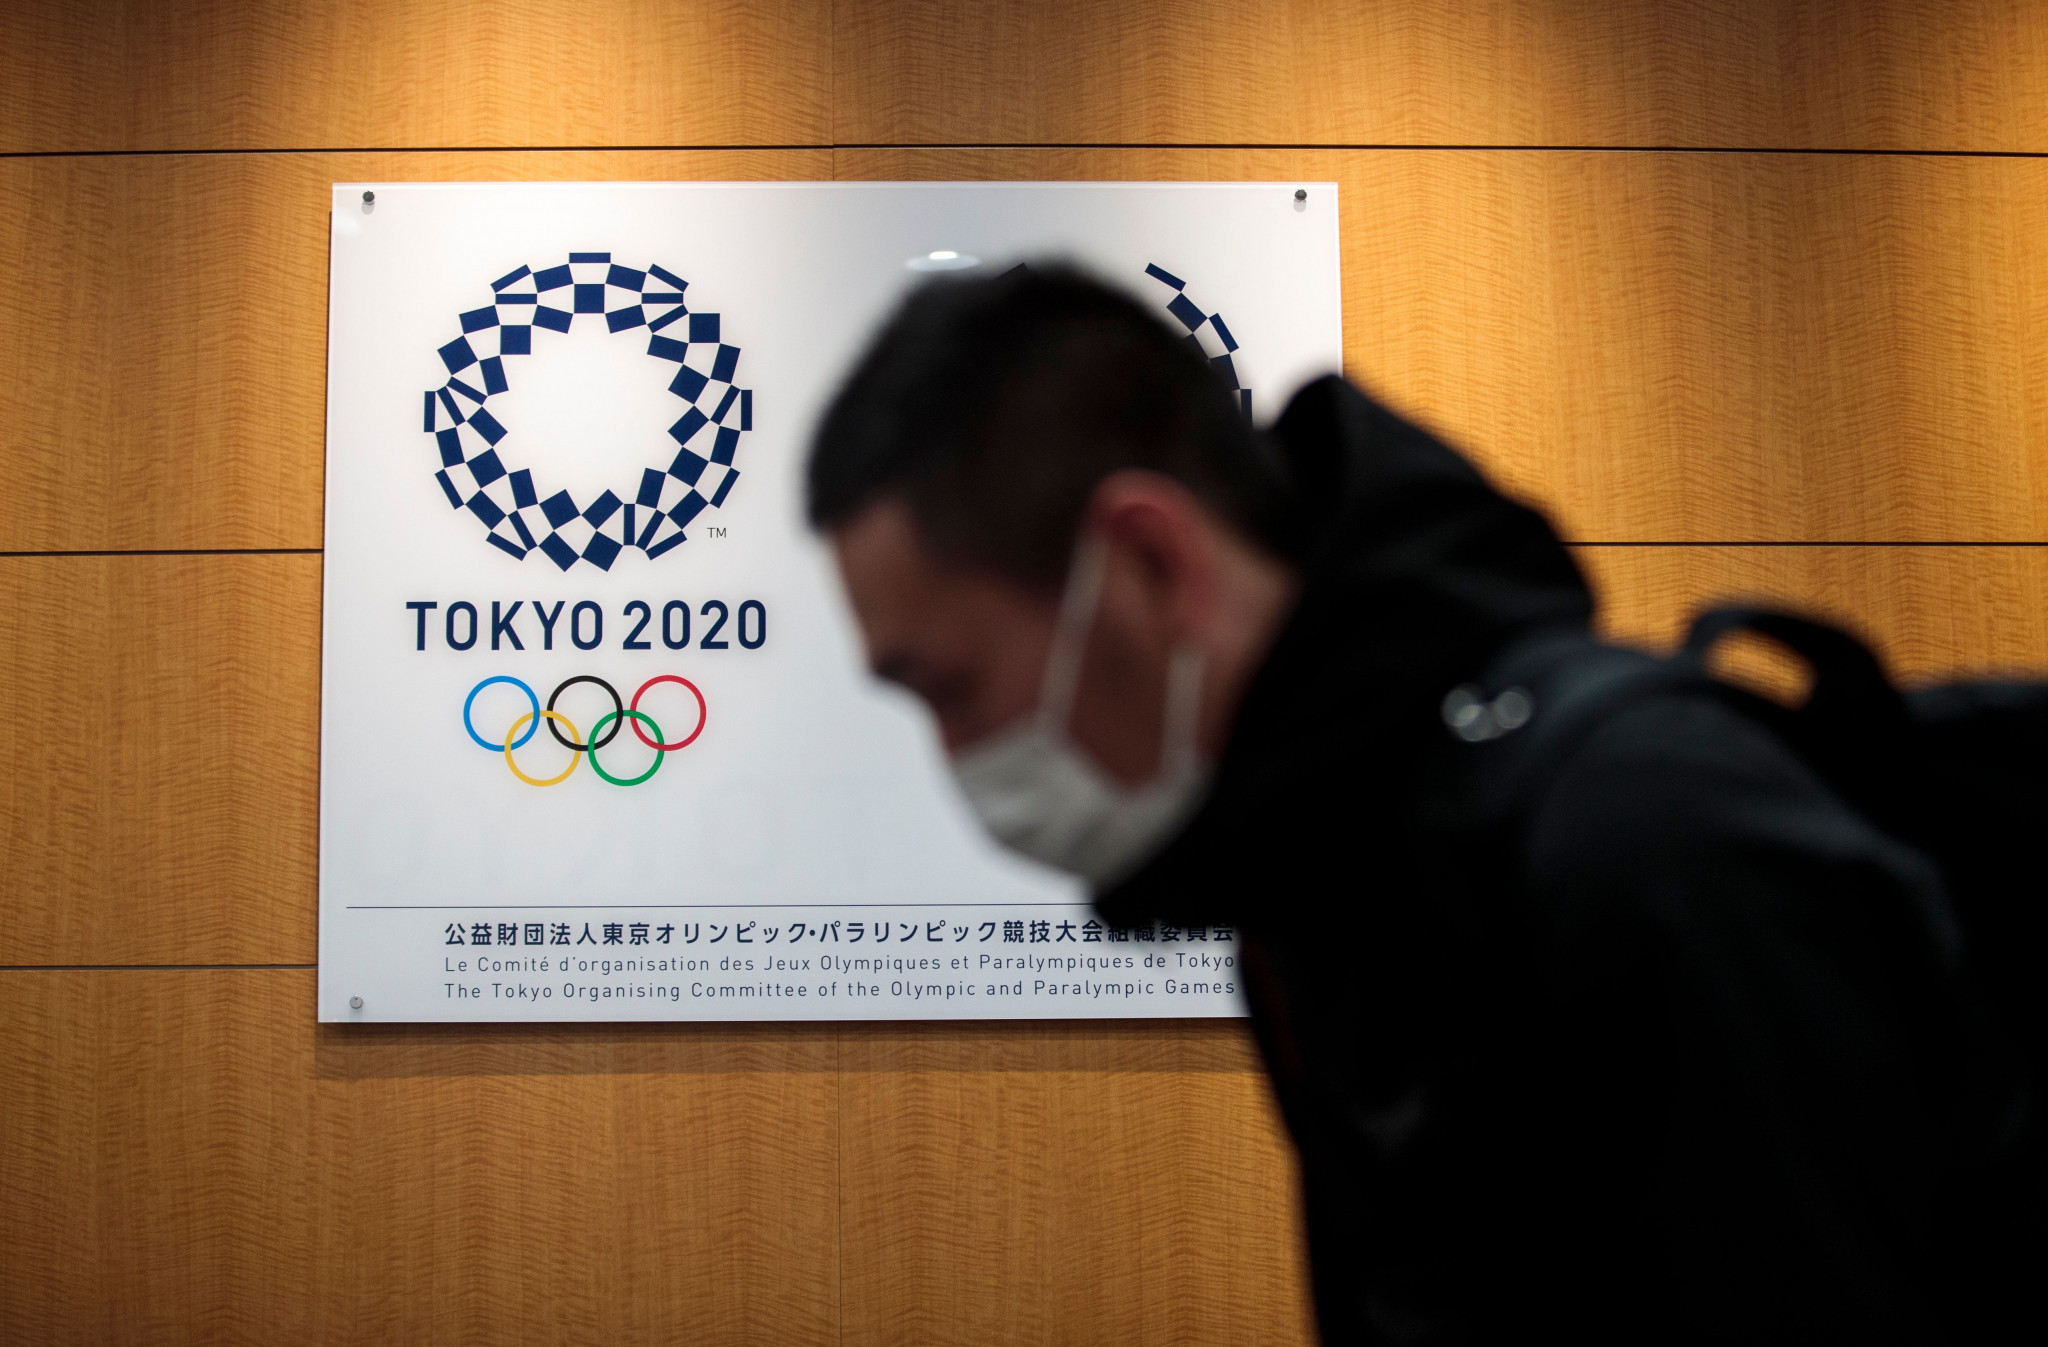 There are fears a lack of a coronavirus vaccine may lead to the cancellation of the Tokyo 2020 Olympic and Paralympic Games ©Getty Images